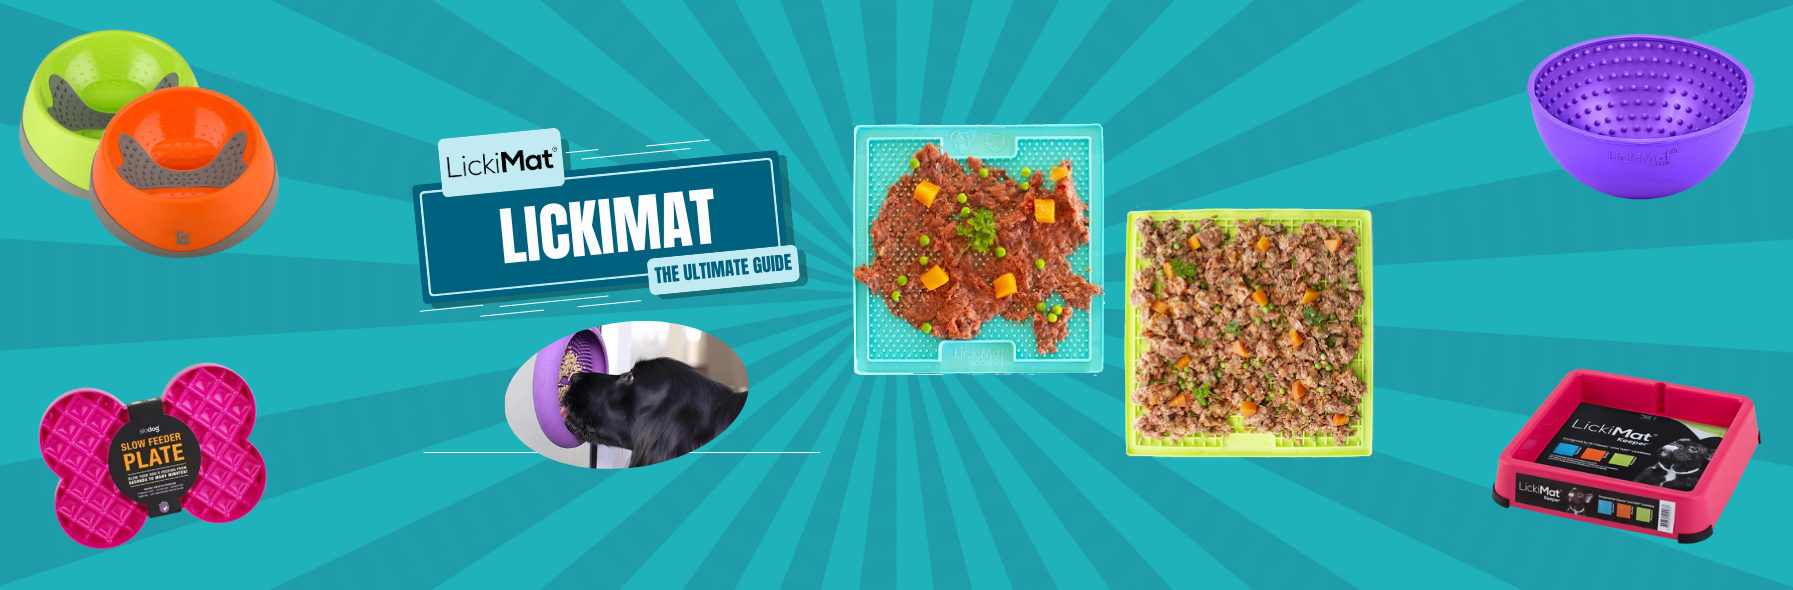 LickiMat for Dogs - The Ultimate Guide